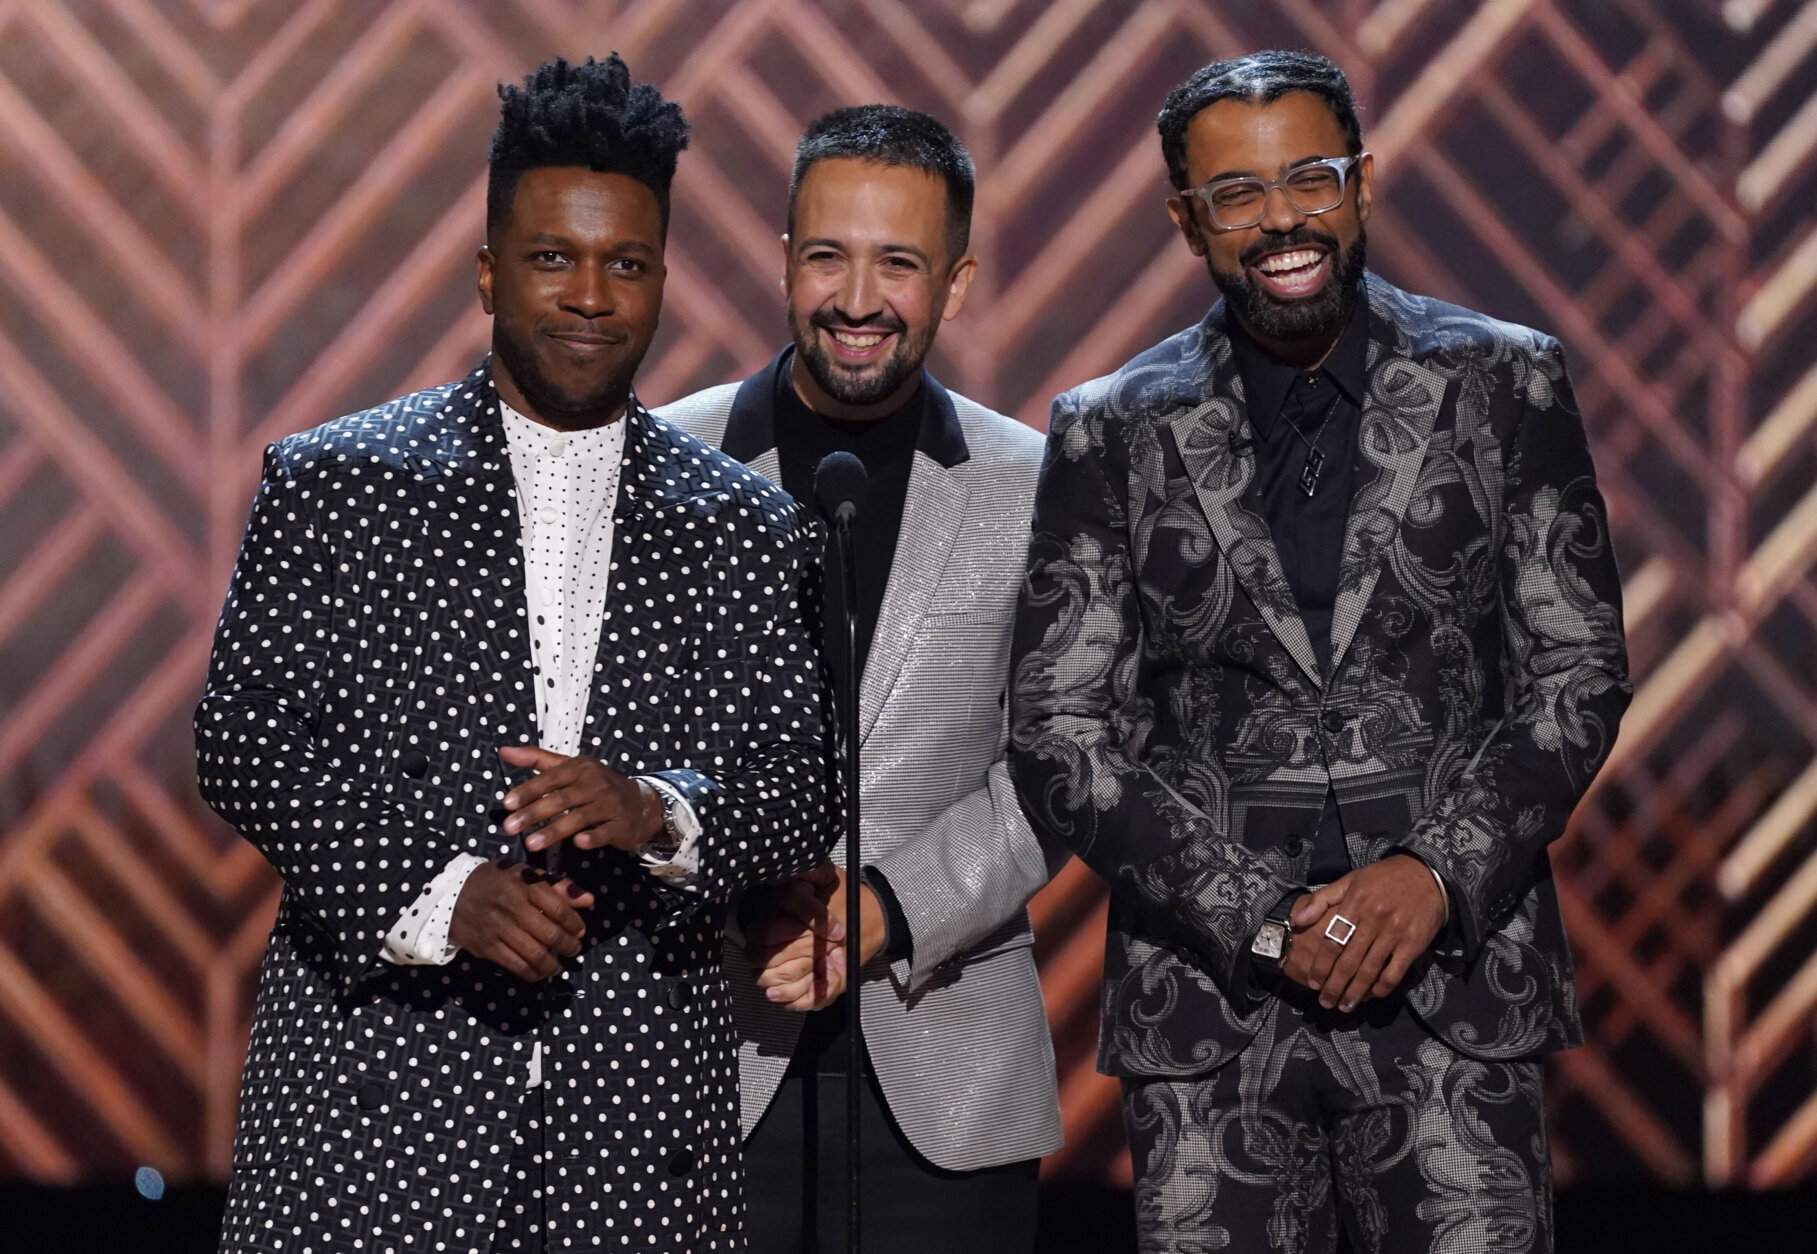 Leslie Odom Jr., from left, Lin-Manuel Miranda and Daveed Diggs speak at the 28th annual Screen Actors Guild Awards at the Barker Hangar on Sunday, Feb. 27, 2022 in Santa Monica, Calif.  (AP Photo/Chris Pizzello)